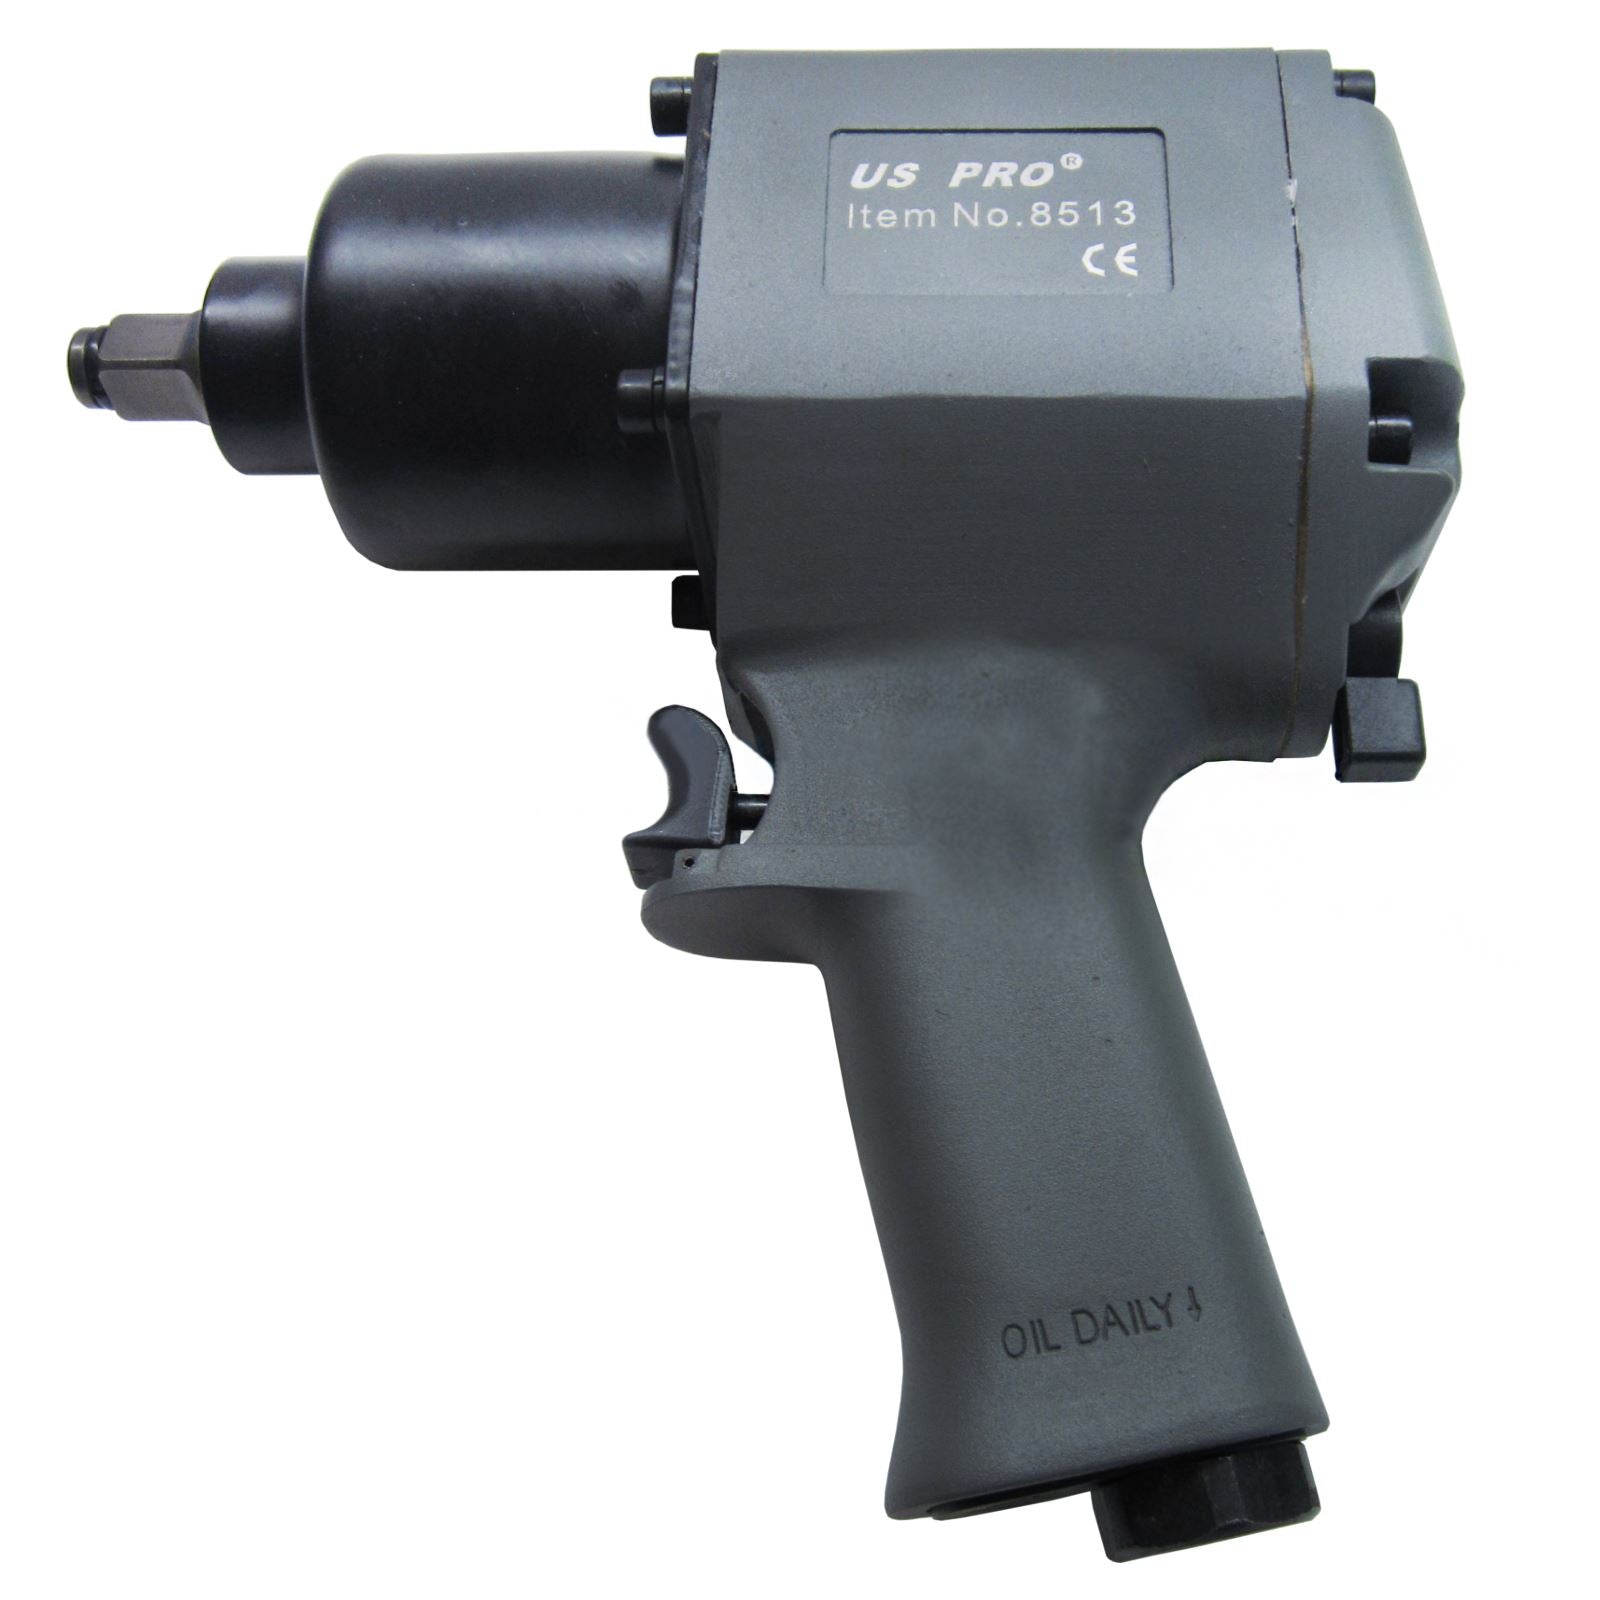 Impact wrench / gun / ratchet 1/2" drive  590 ft/lbs U S Pro Tools AT039